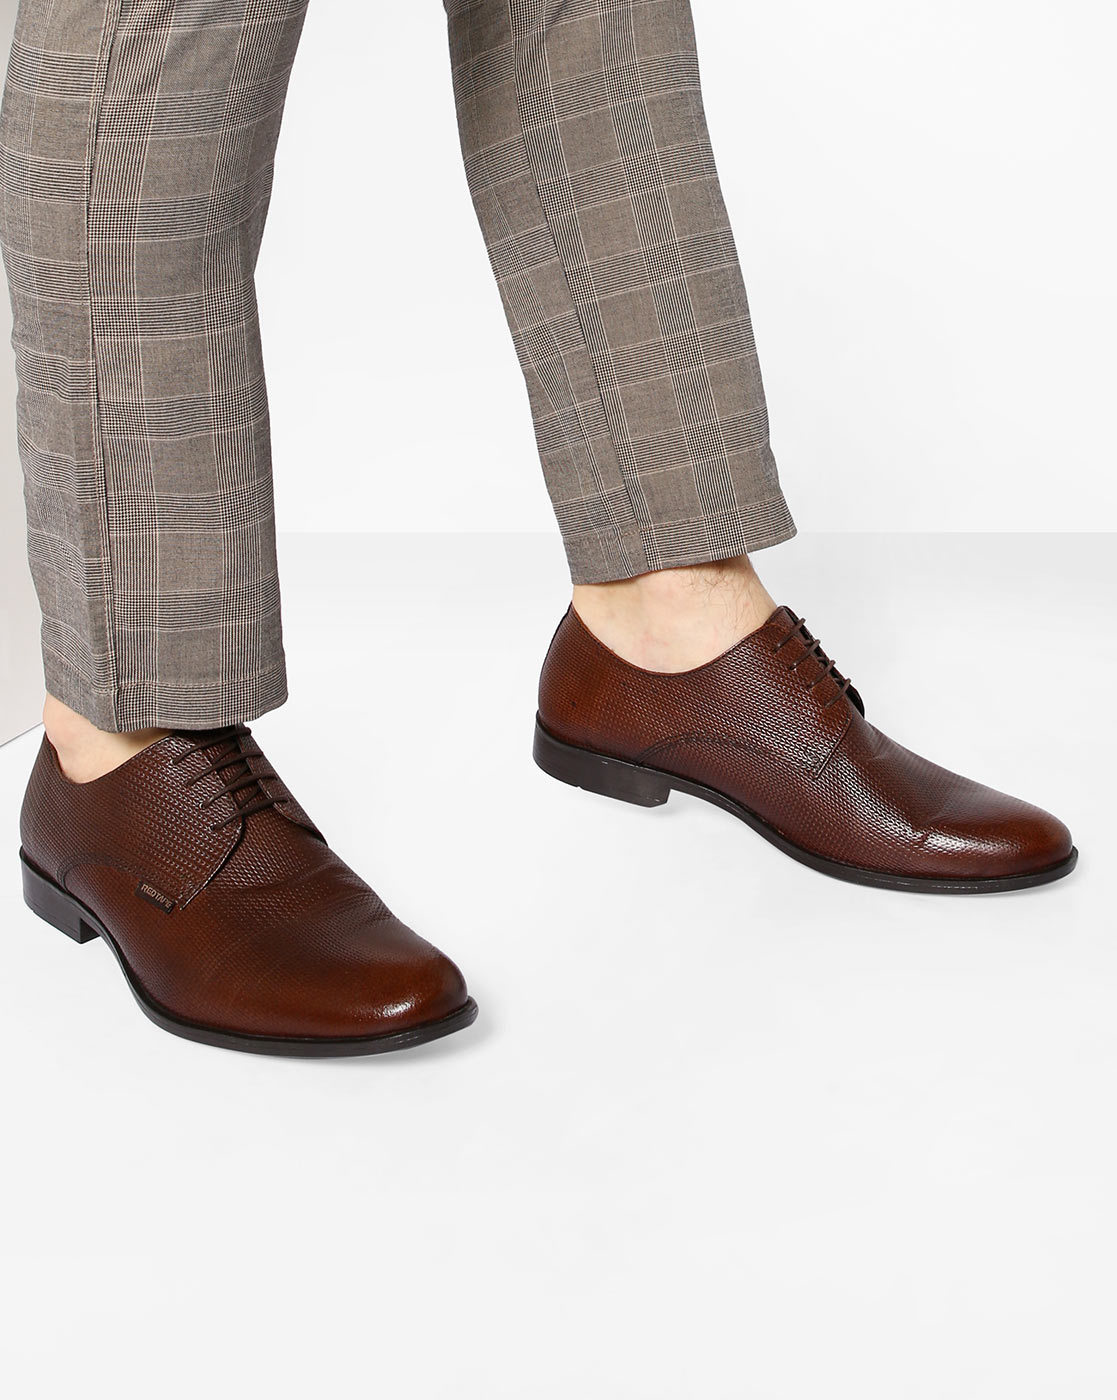 red tape dark tan derby shoes